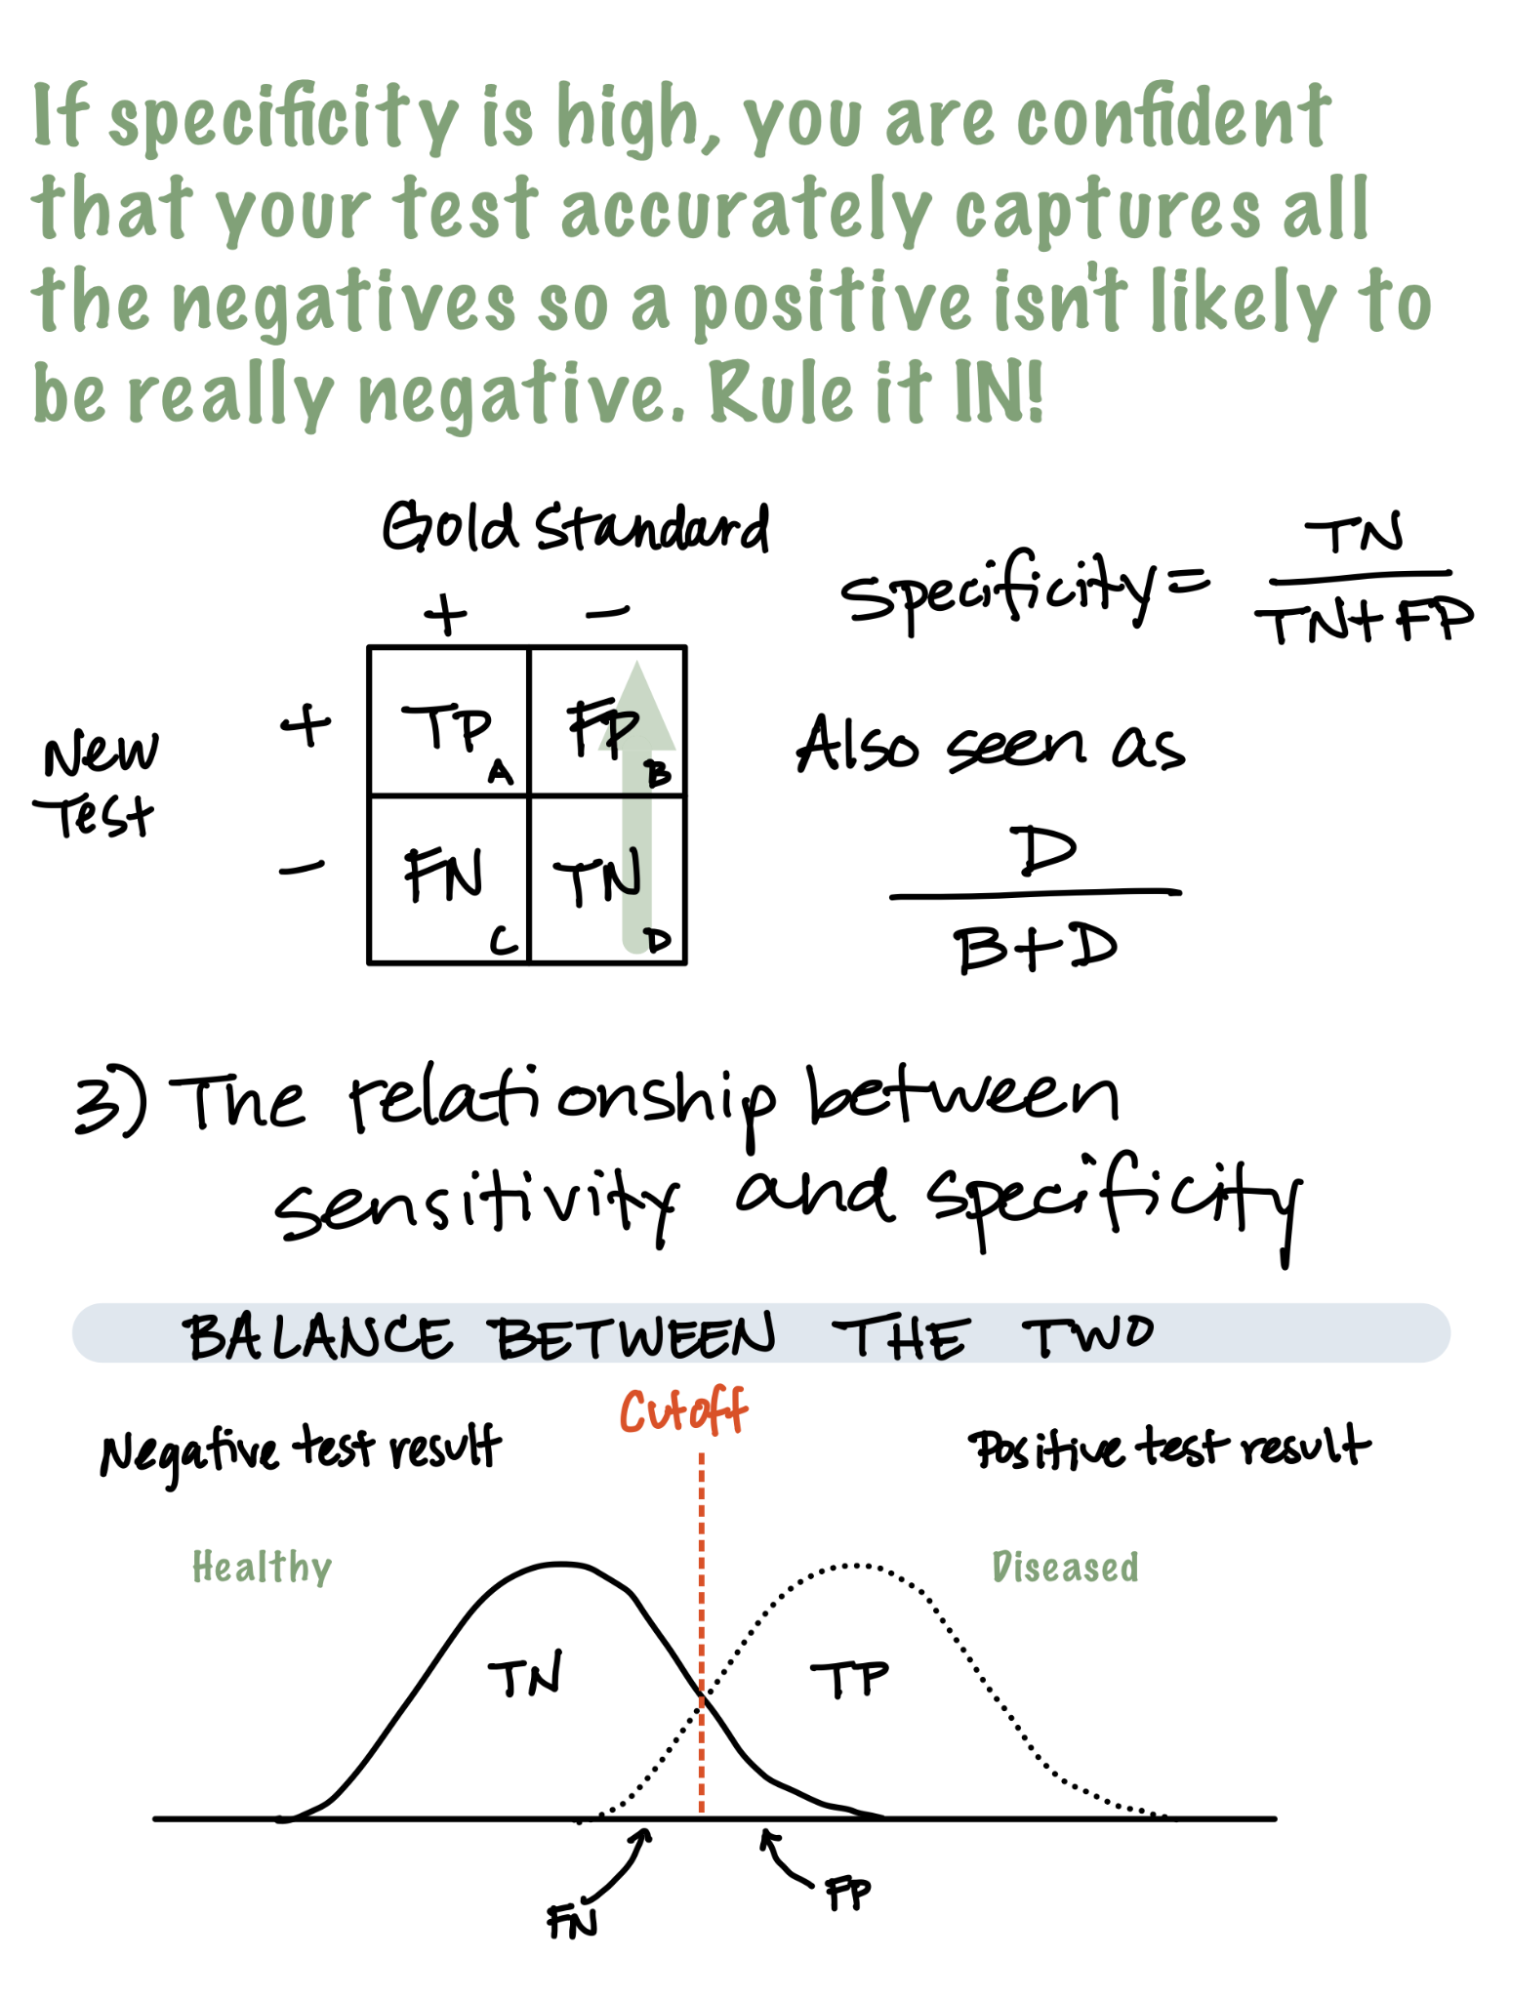 If specificity is high, you are confident that your test accurately captures all the negatives so a positive isn't likely to be really negative. Rule it IN! Below: Two-by two table as found in Chapter 3 Part 1 Summary. Specificity equals TN/(TN+FP). Also seen as D/(B+D). Box 3. The relationship between sensitivity and specificity. Balance Between the Two: Left is distribution curve labelled TN (healthy), negative test result. Right is another distribution curve labelled TP (diseased), positive test result. The tails of both distributions overlap with each other, with red dotted line (cutoff) indicating the intersection of their curves. The area to the left of the cutoff in which the TP curve overlaps with TN represents FN. The area to the right of the cutoff in which the TN curve overlaps with TP represents FP.